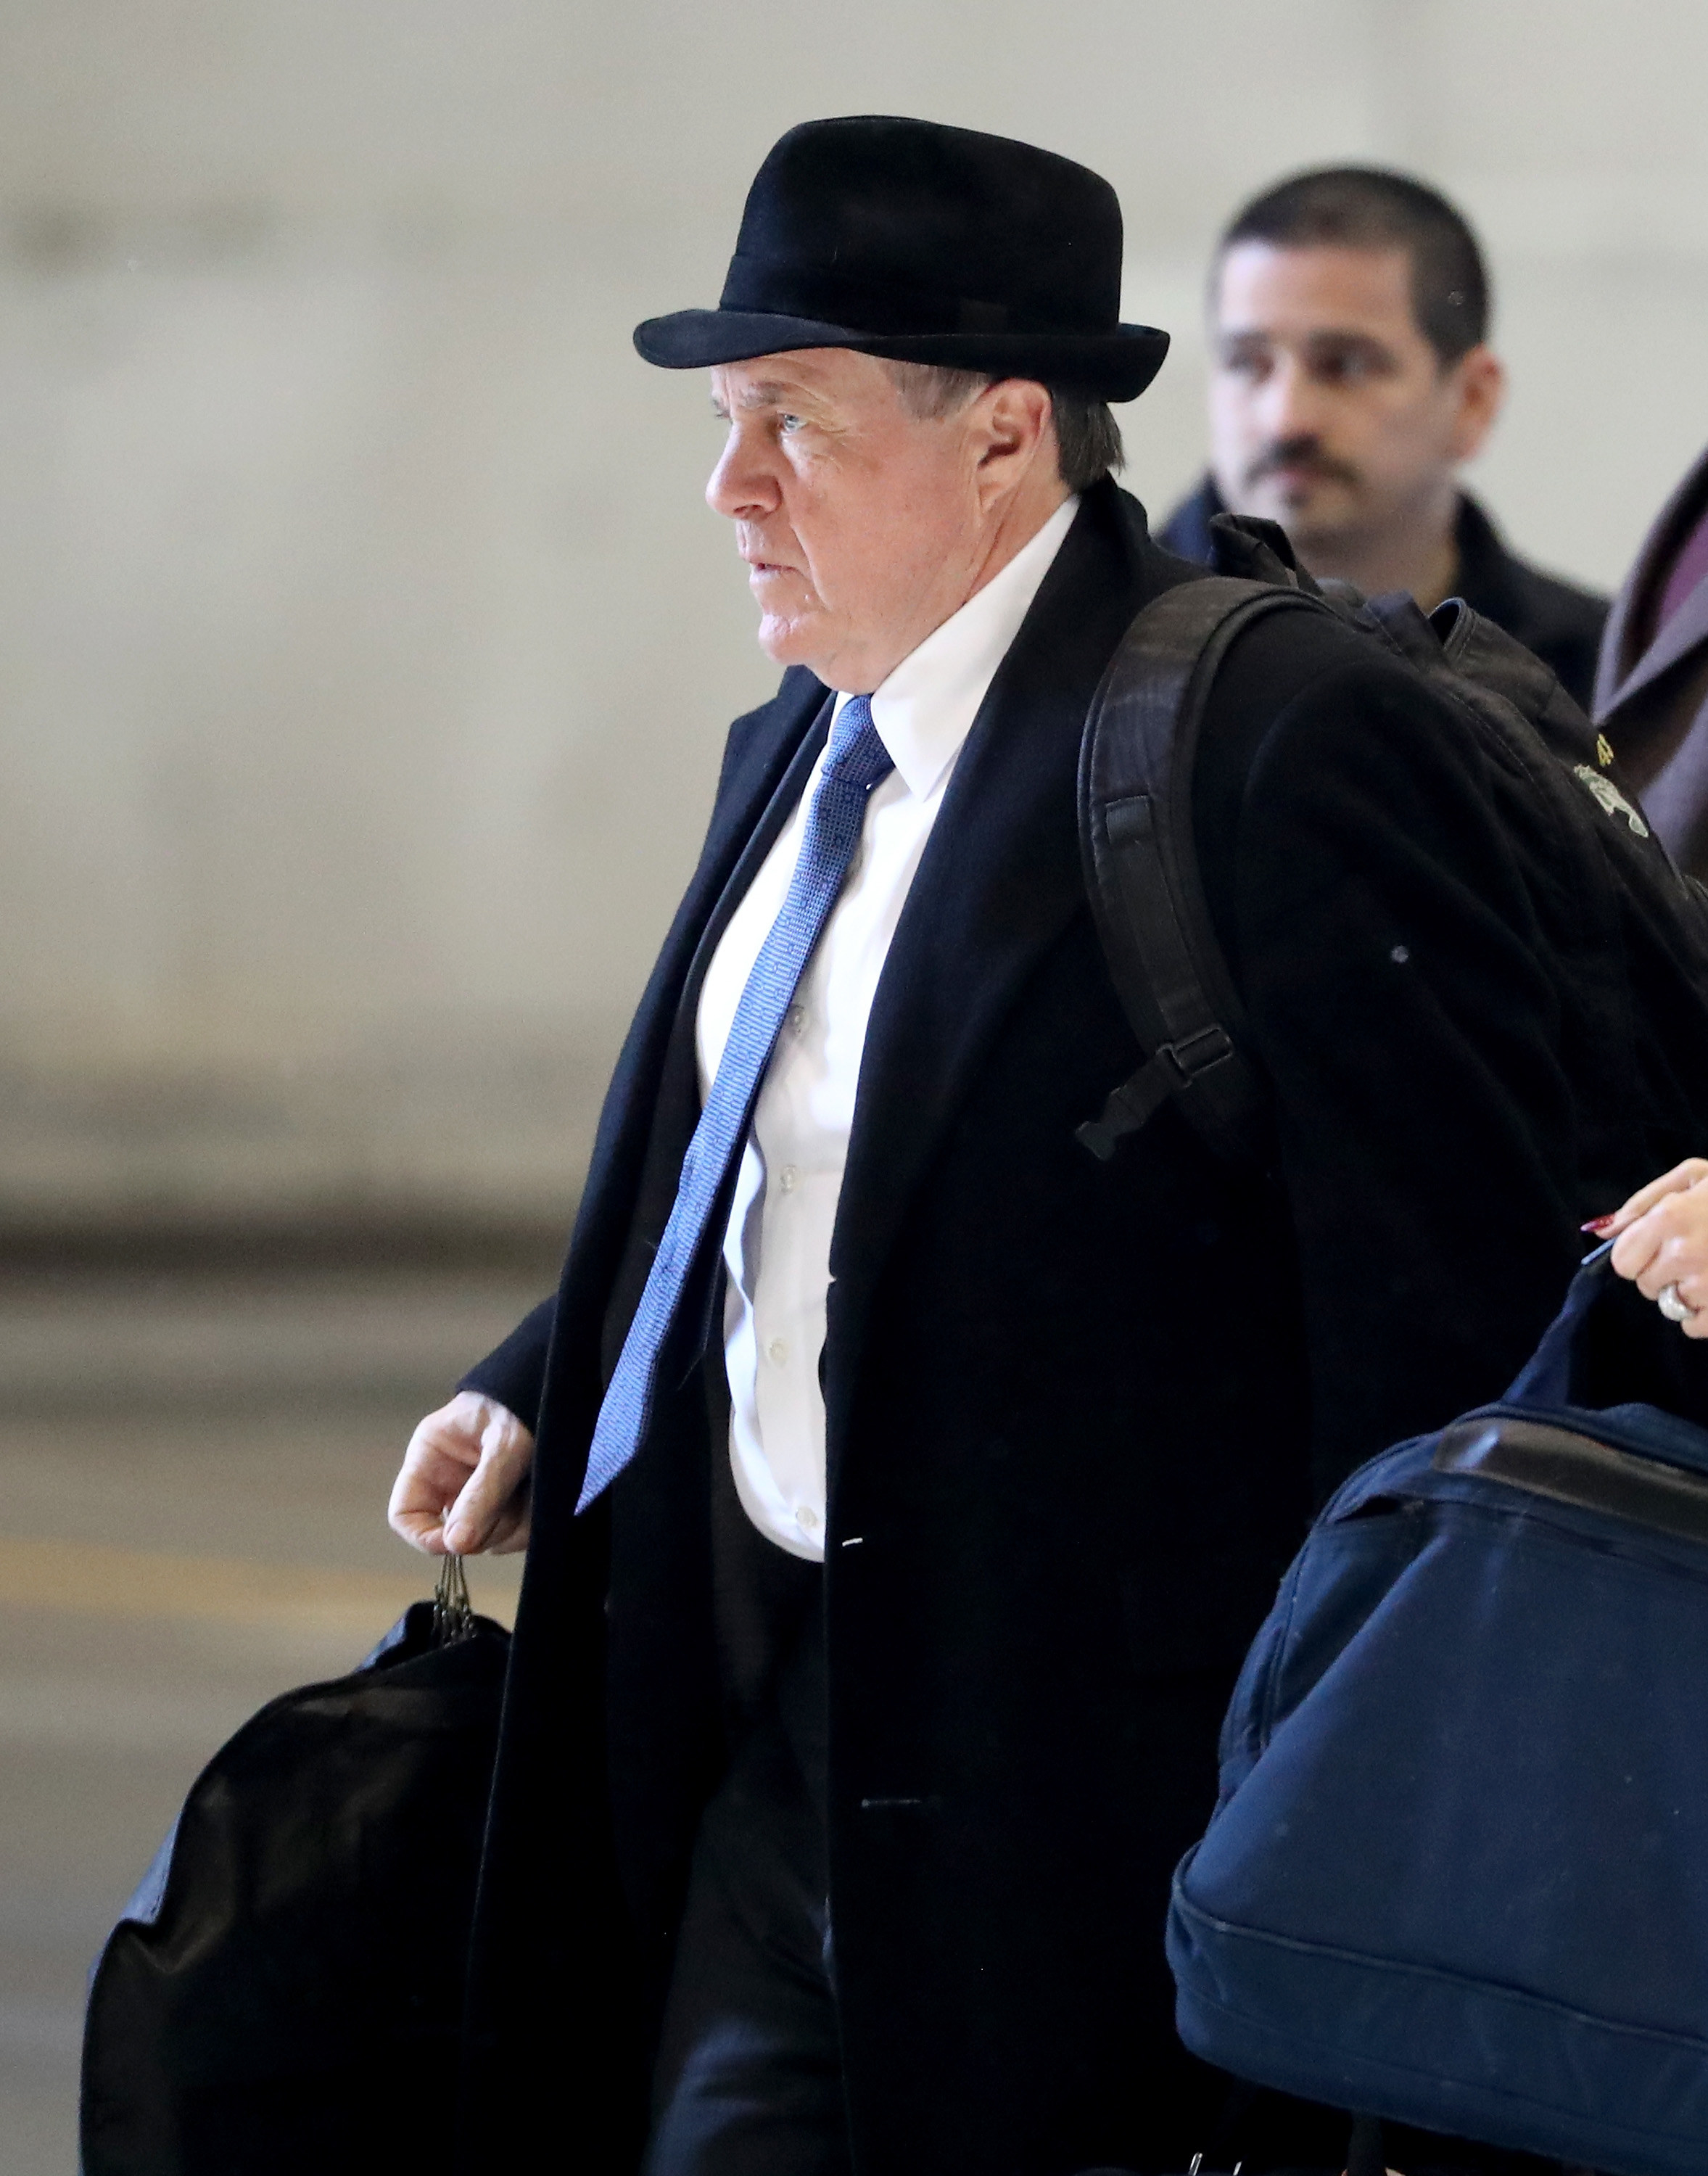 Bill Belichick in a fedora and suit